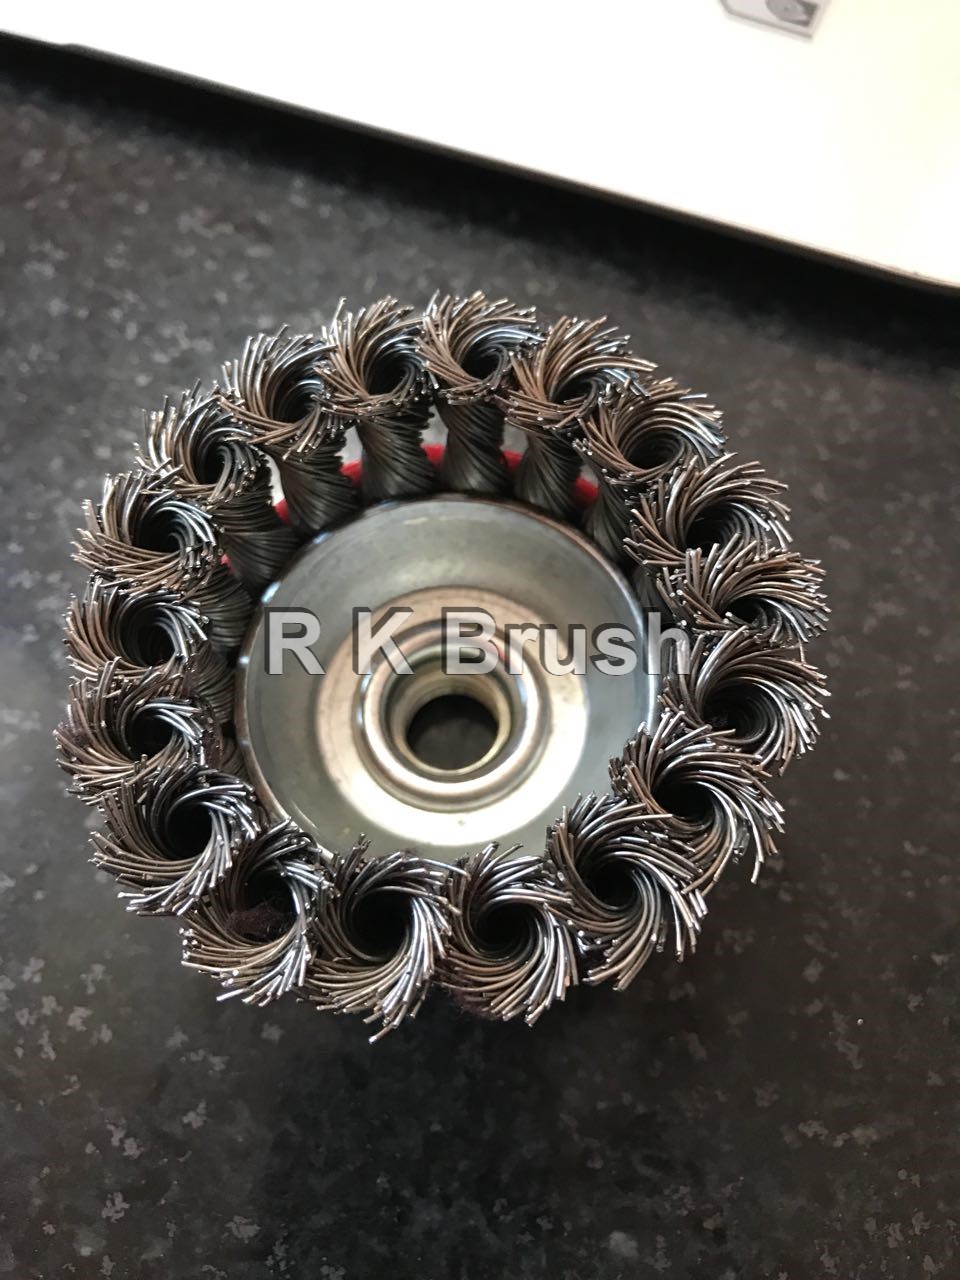 Twist Knot Cup Brush